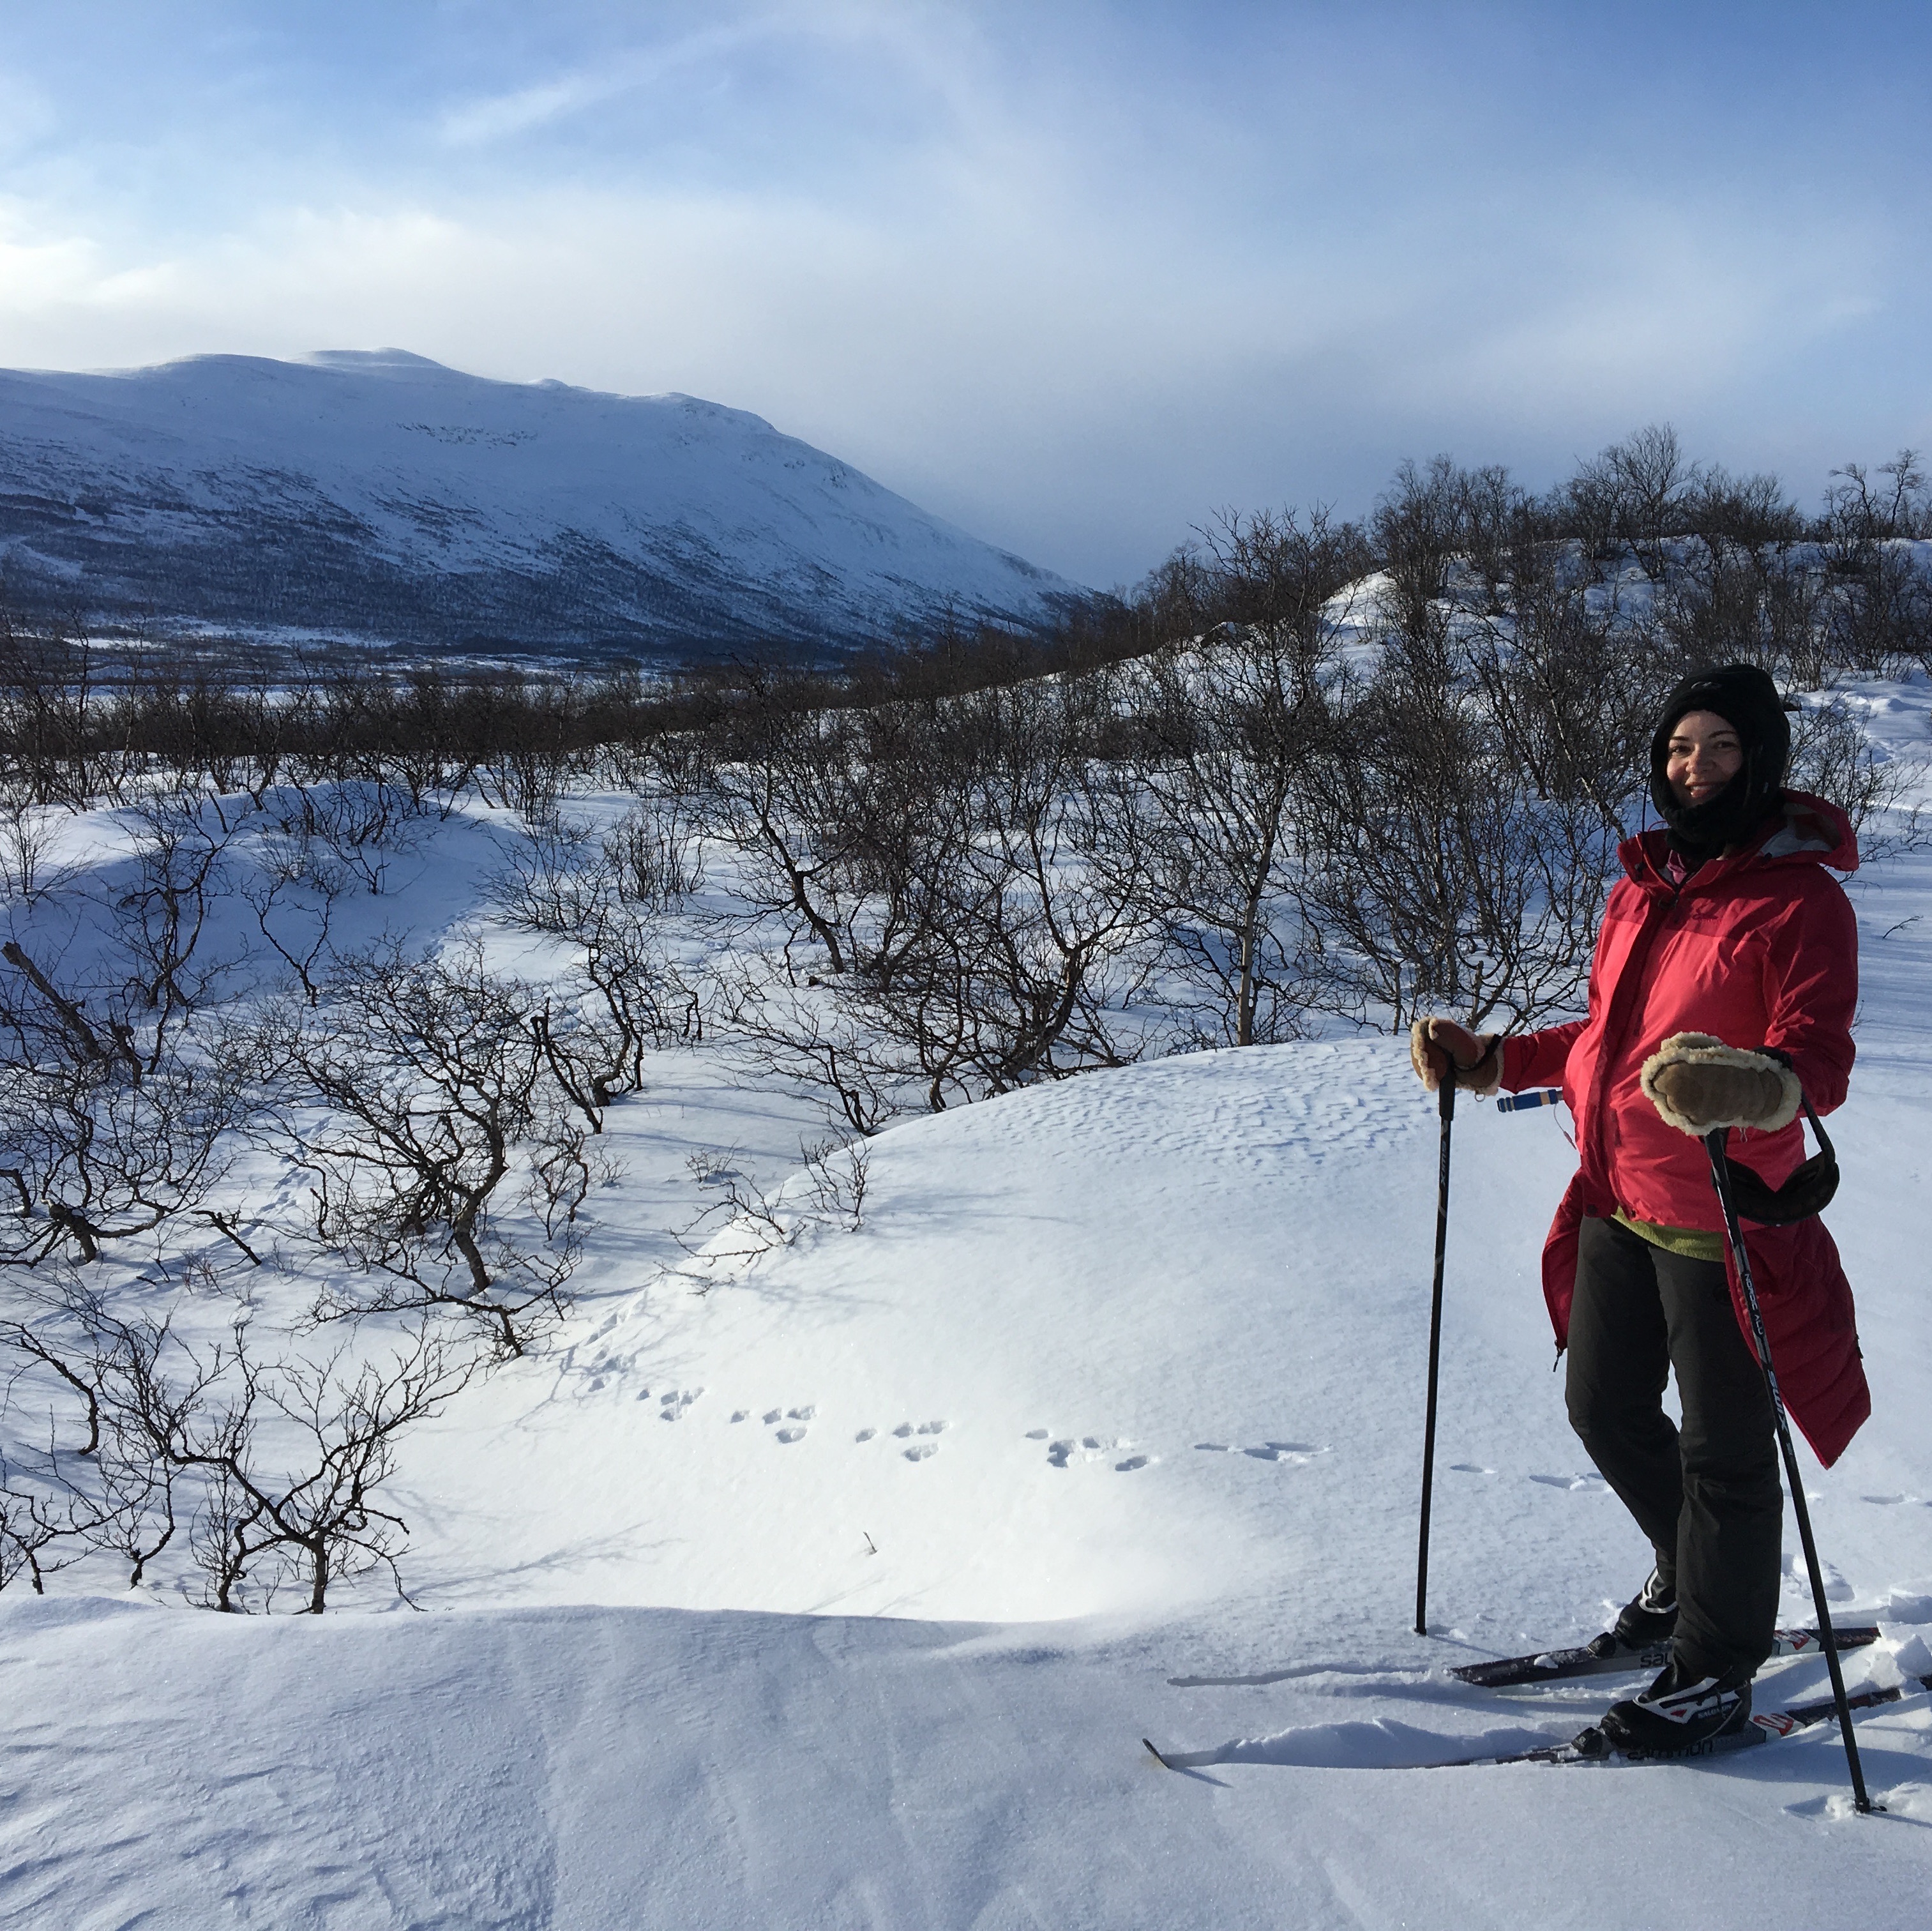 Skiing atop the large island in the middle of the lake, Abisko in the background.